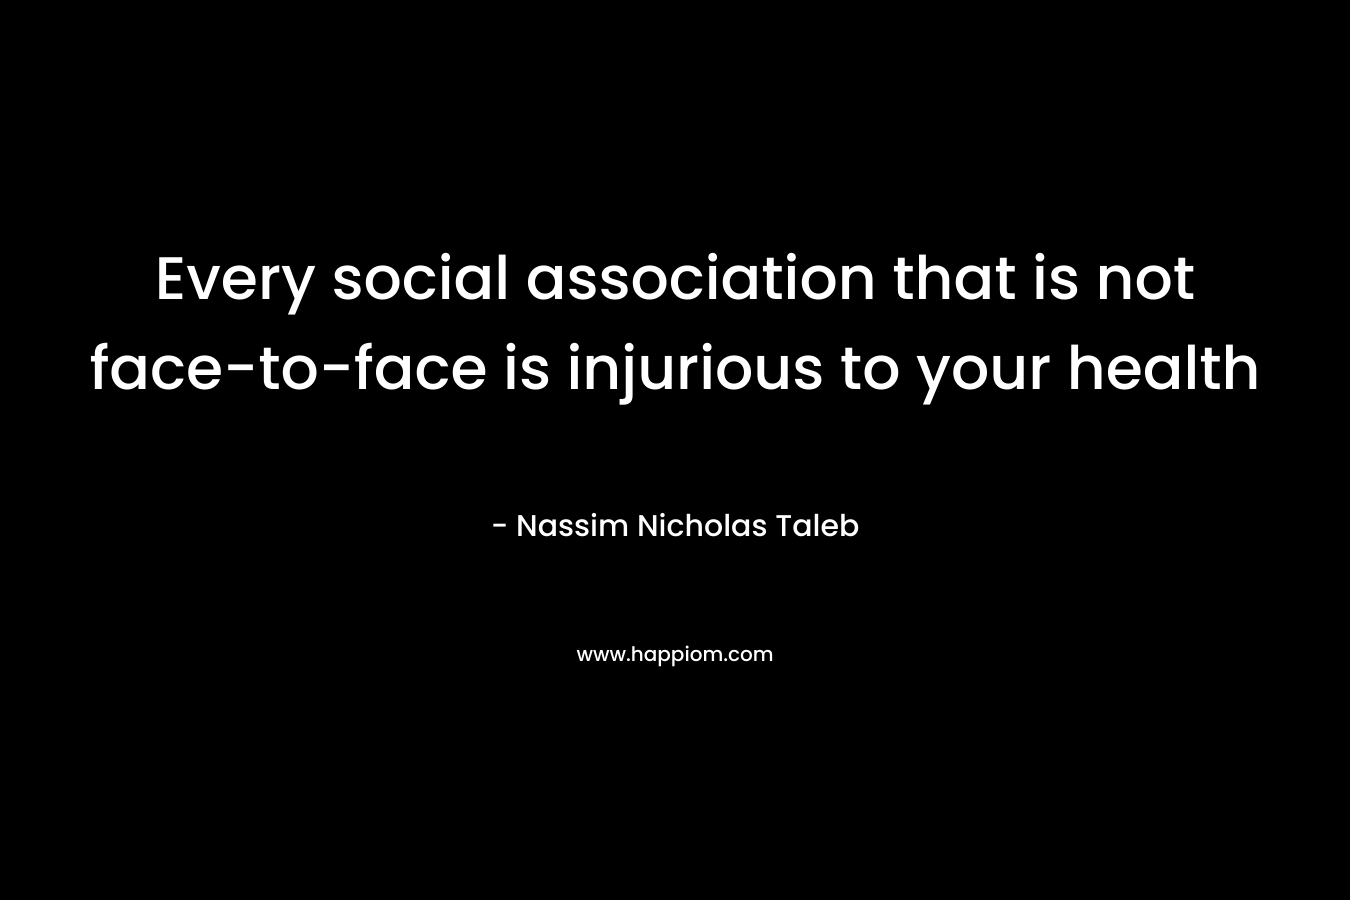 Every social association that is not face-to-face is injurious to your health – Nassim Nicholas Taleb